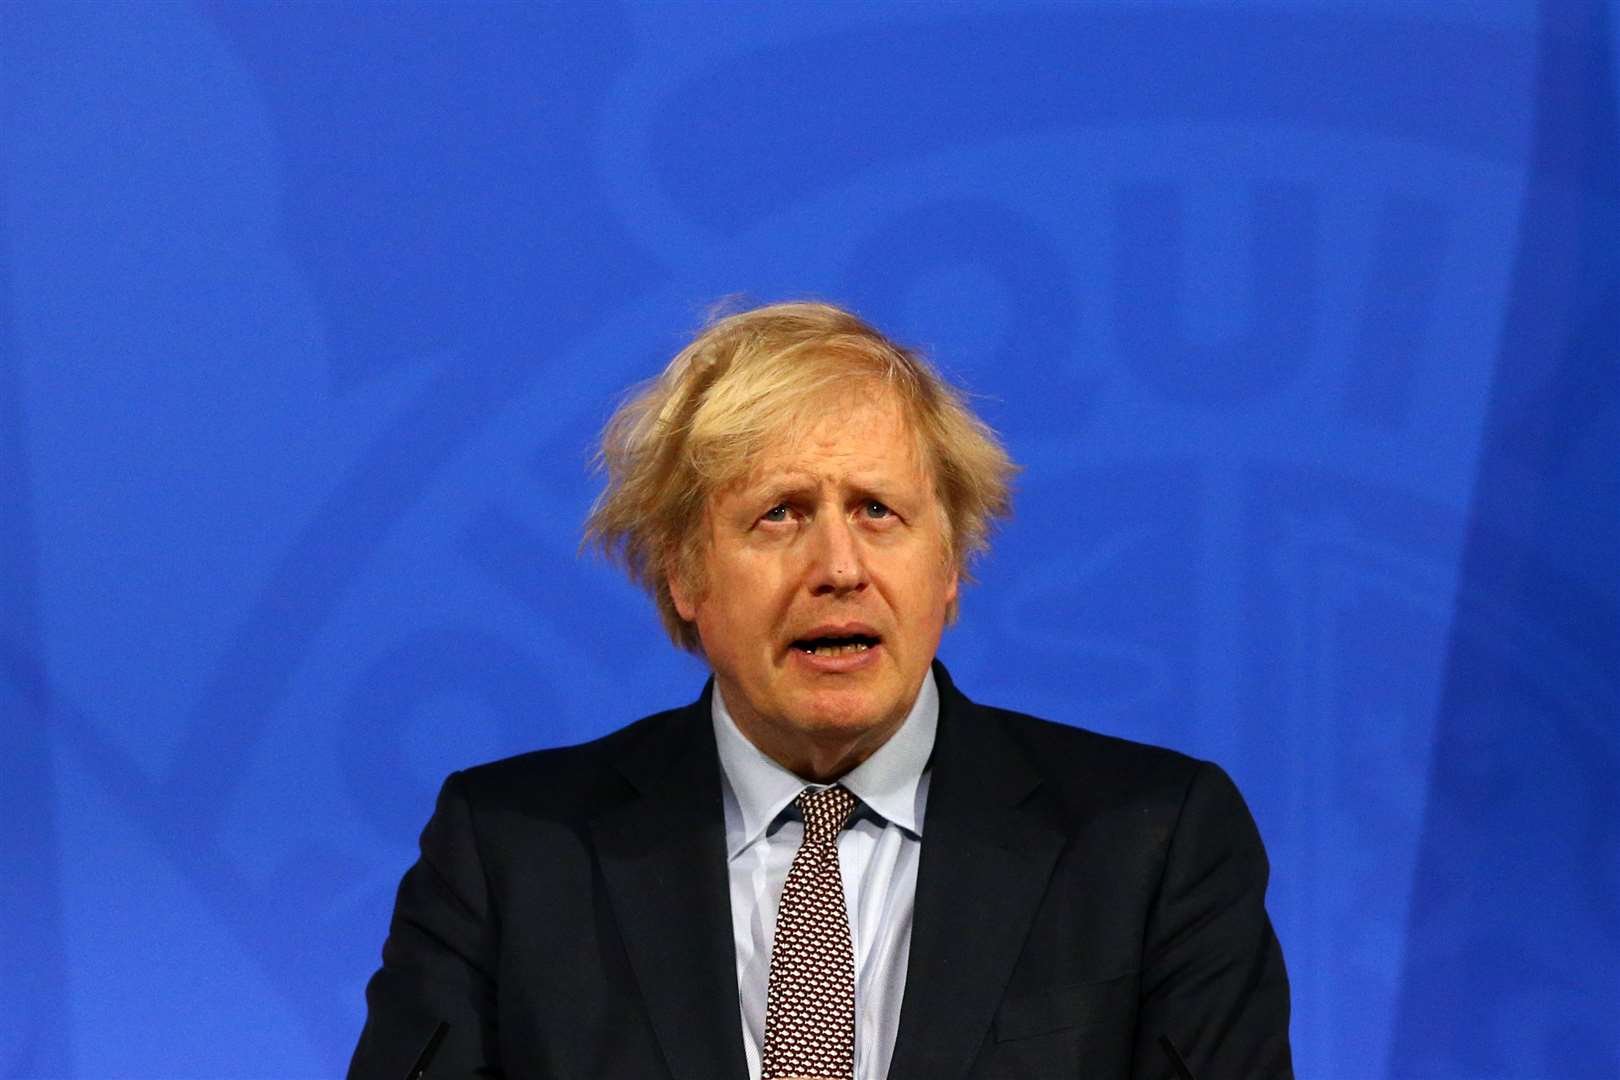 Prime Minister Boris Johnson is due to travel to India later this month. (Hollie Adams/PA Wire)